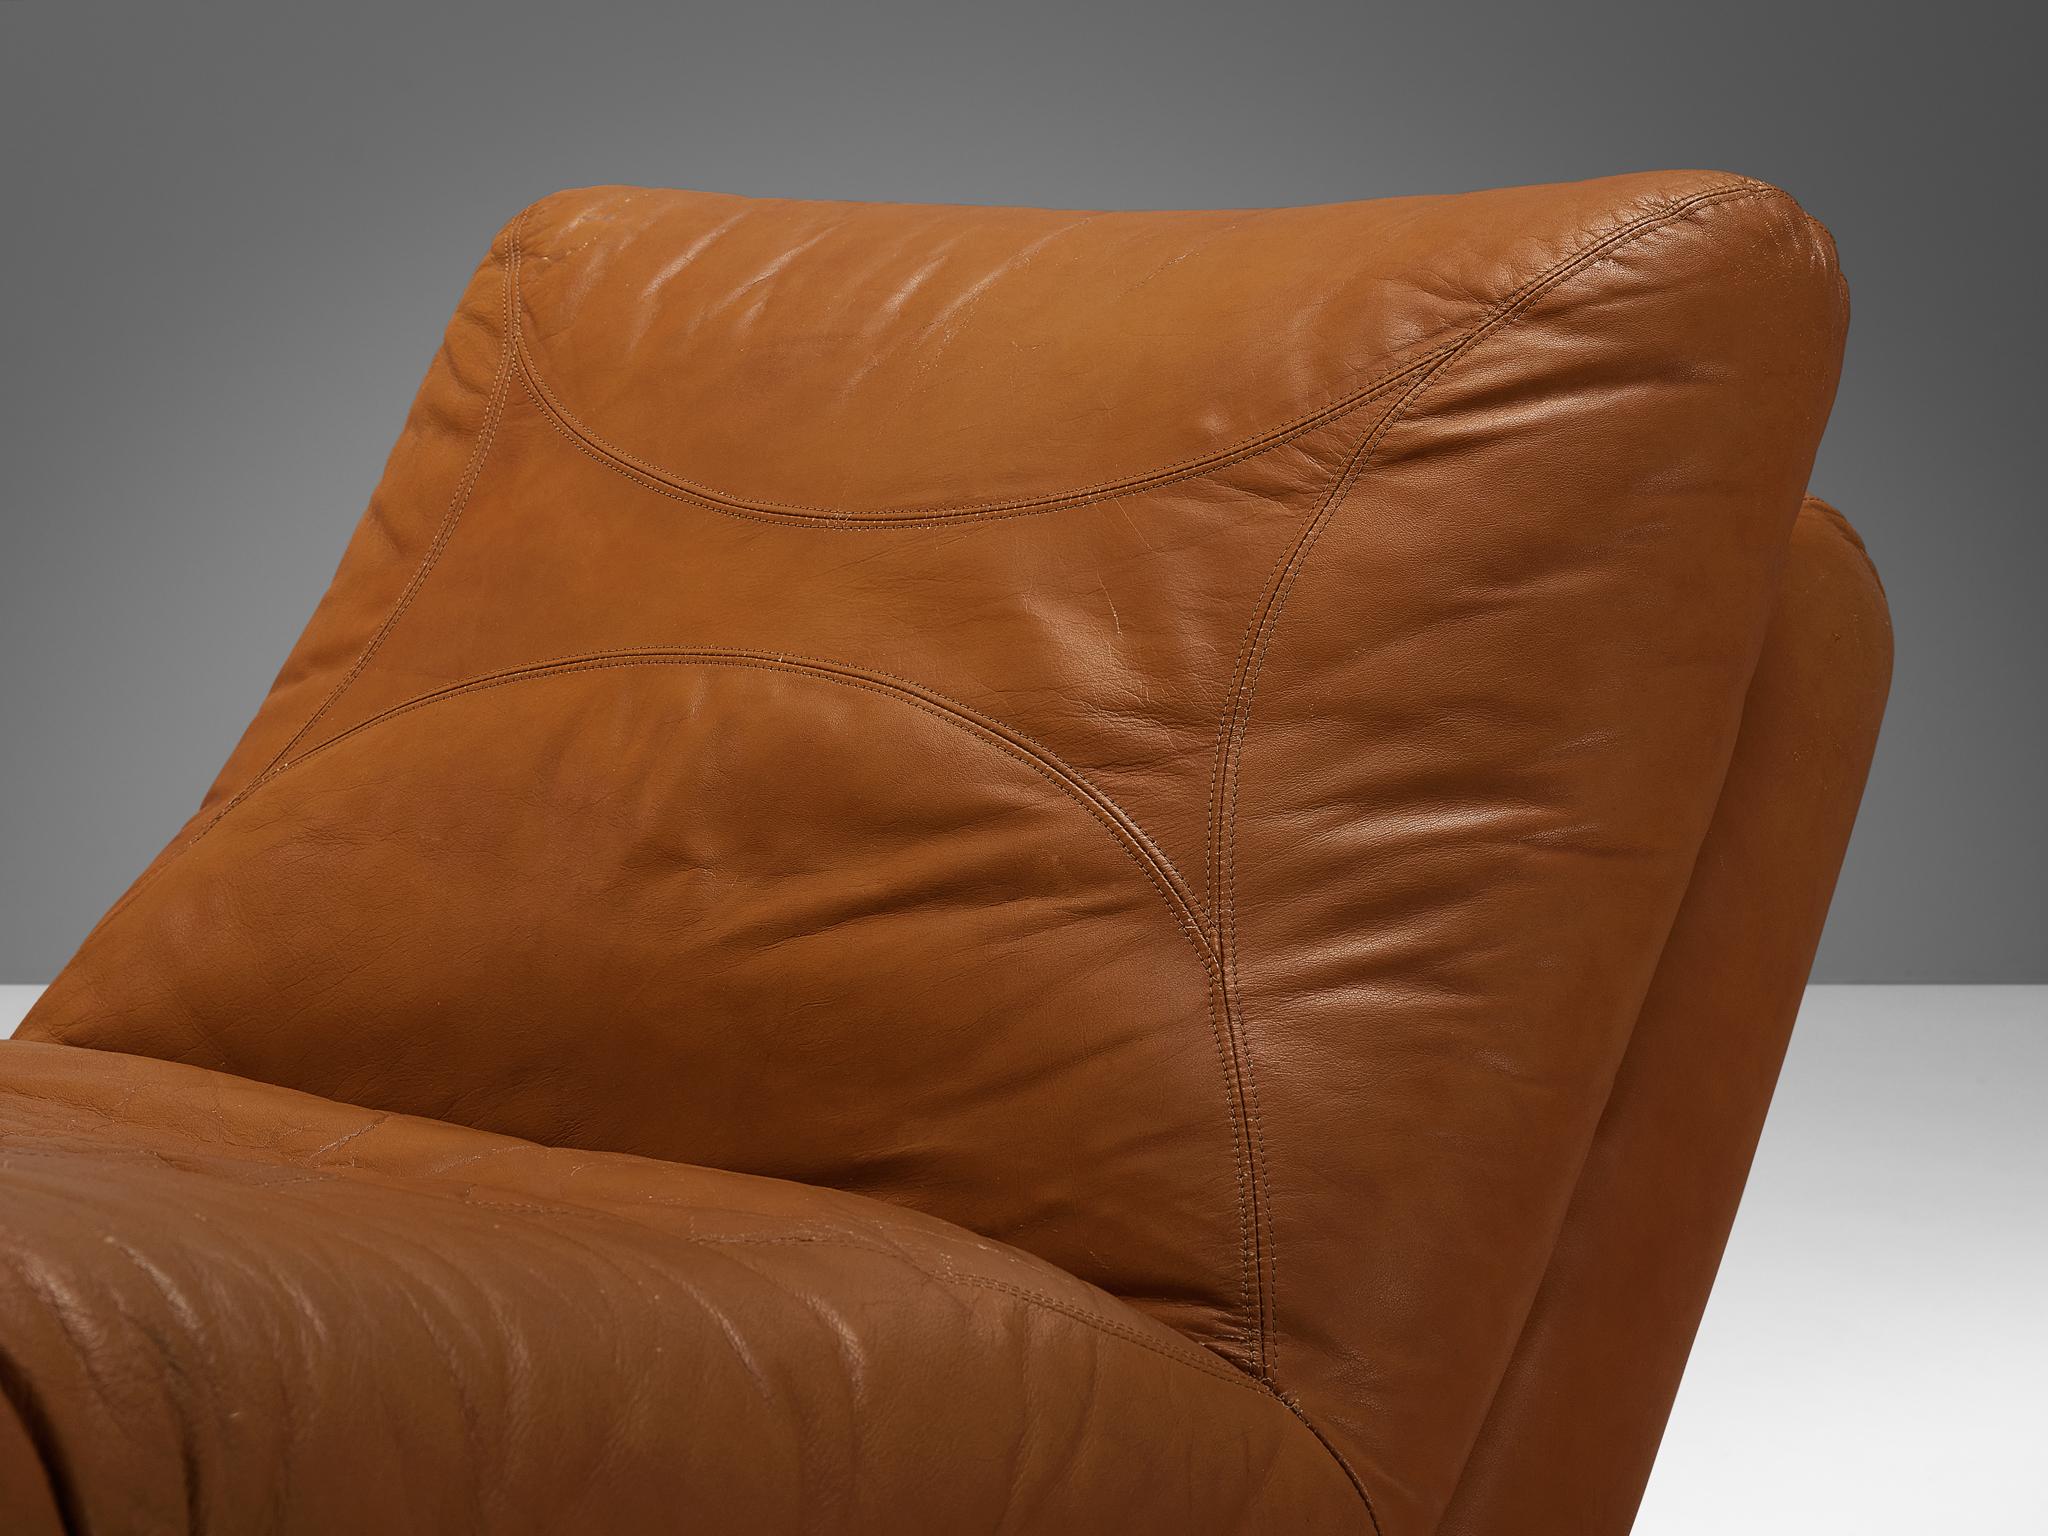 Post-Modern Alessandro Becchi for Giovannetti 'Papessa' Chaise Longue in Leather